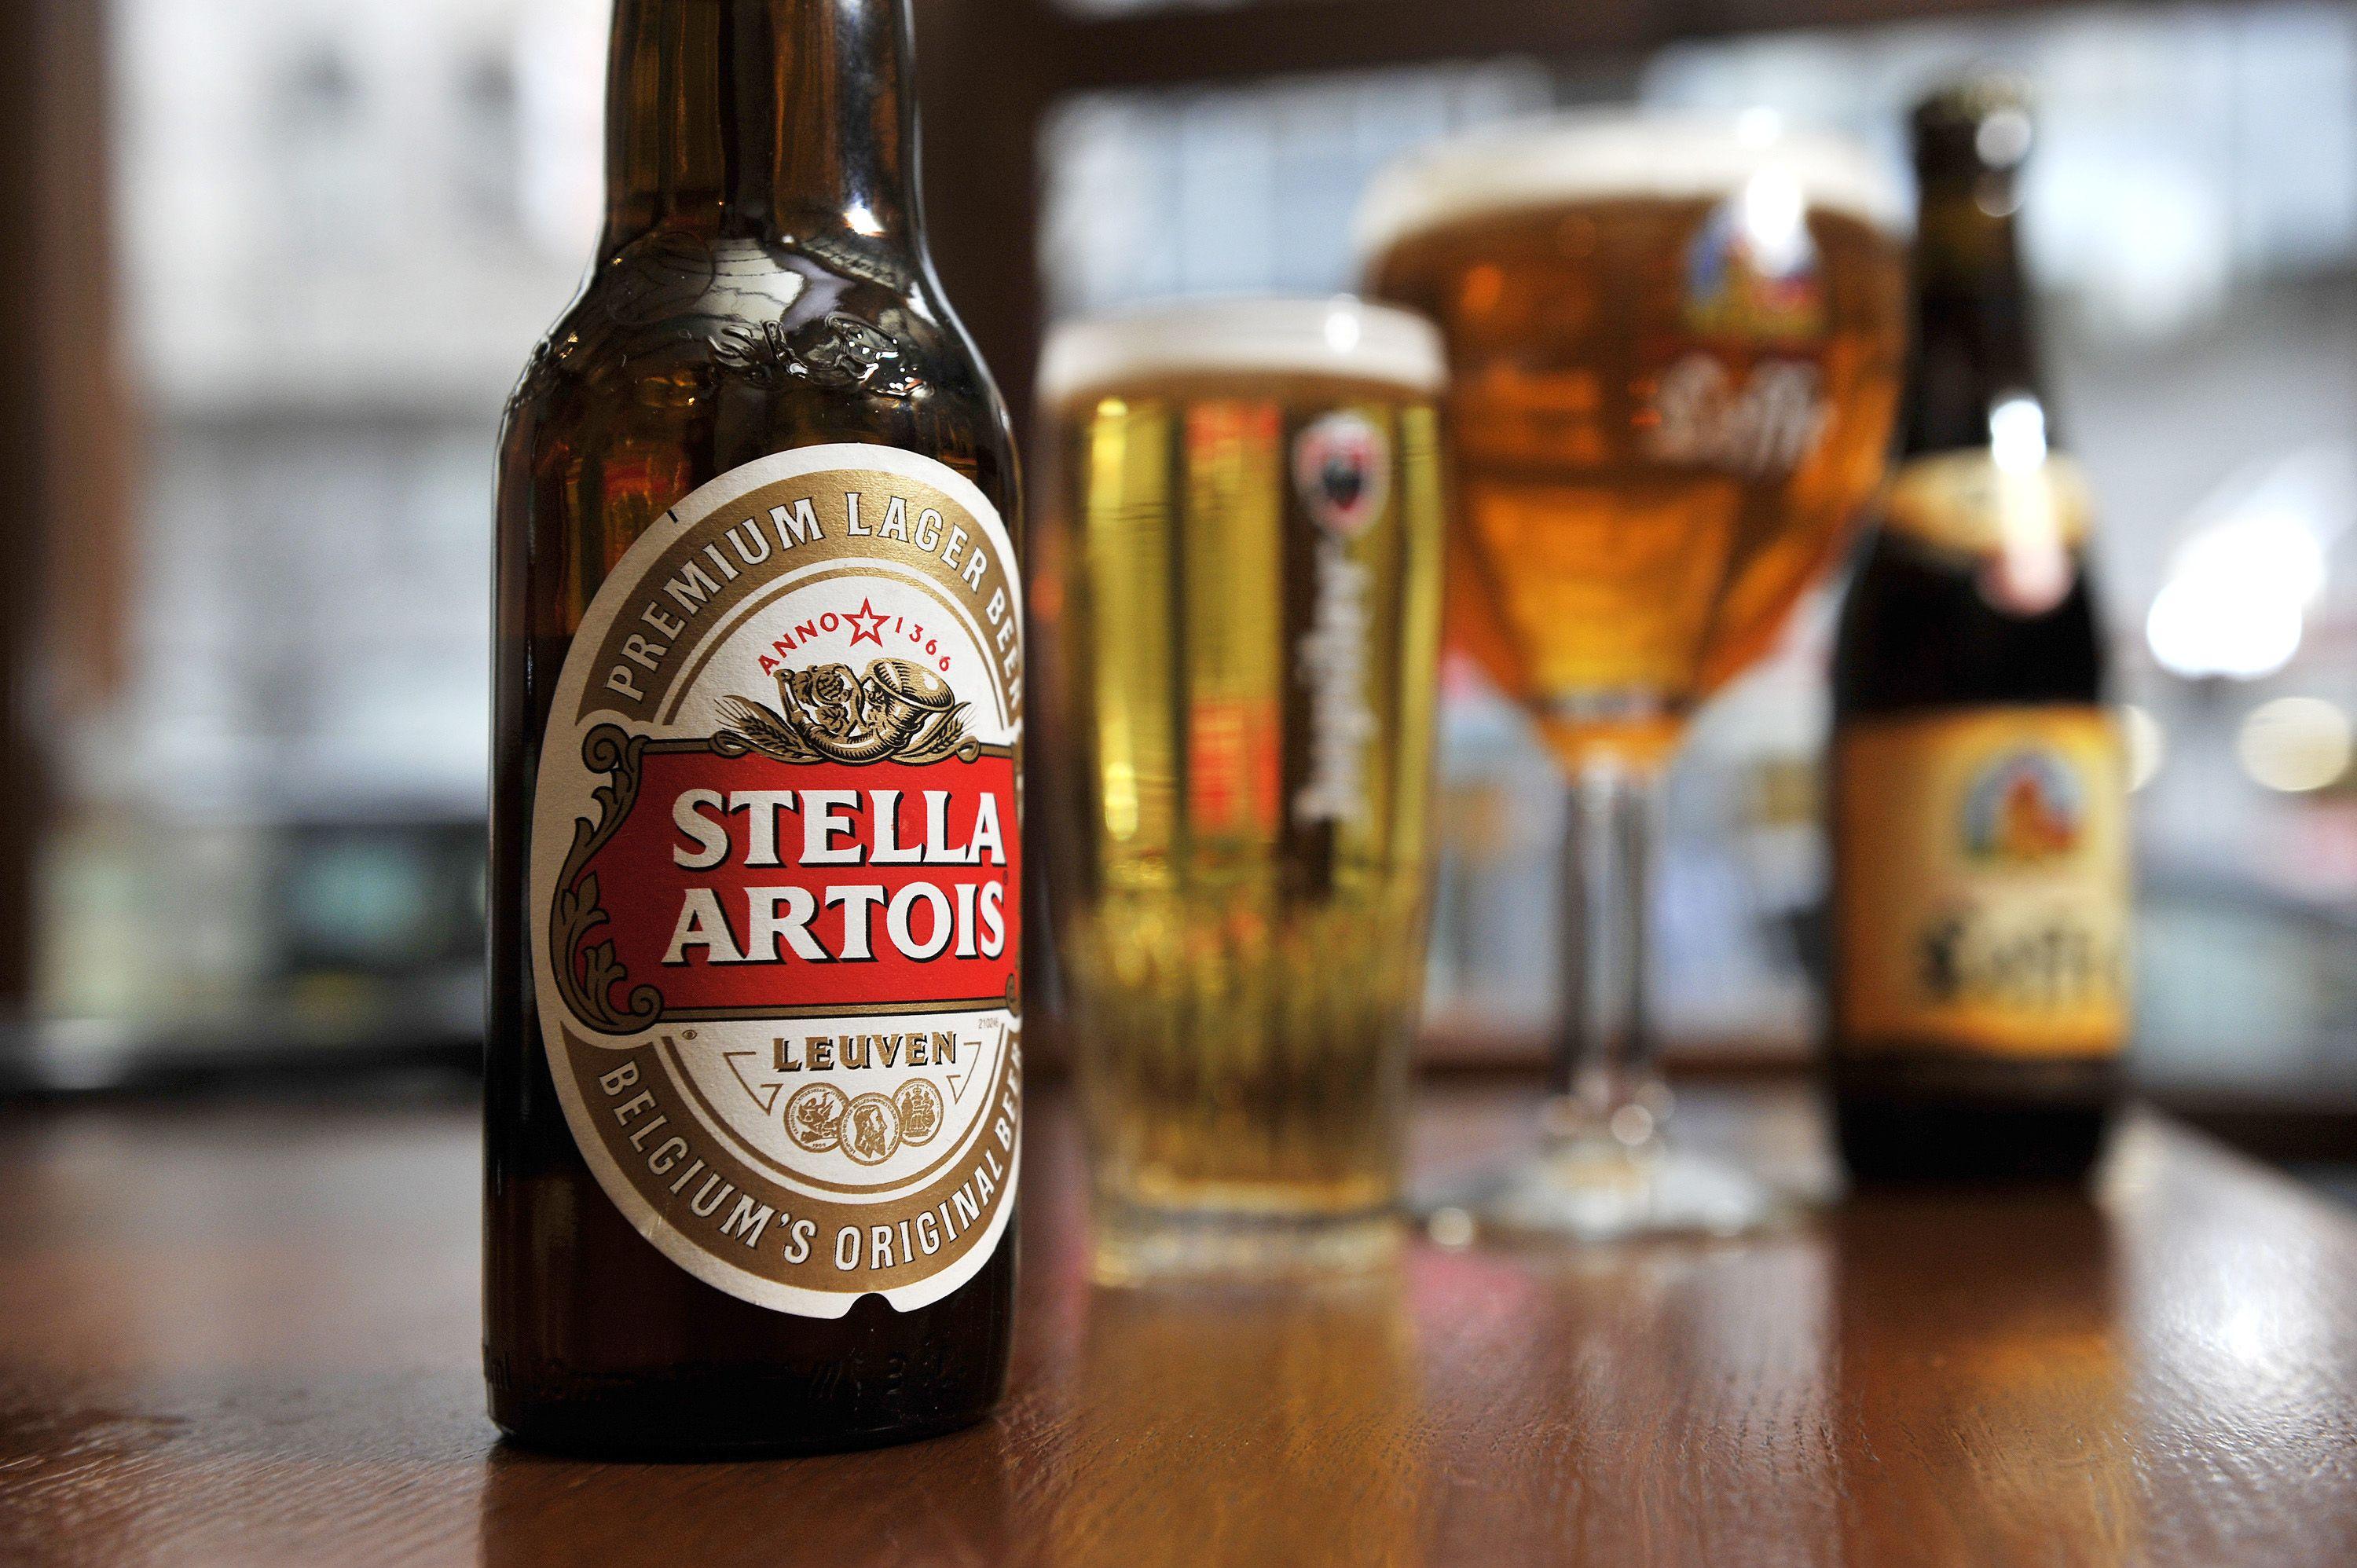 Stella Artois Logo - These Are the 10 Oldest Logos in the World | Time